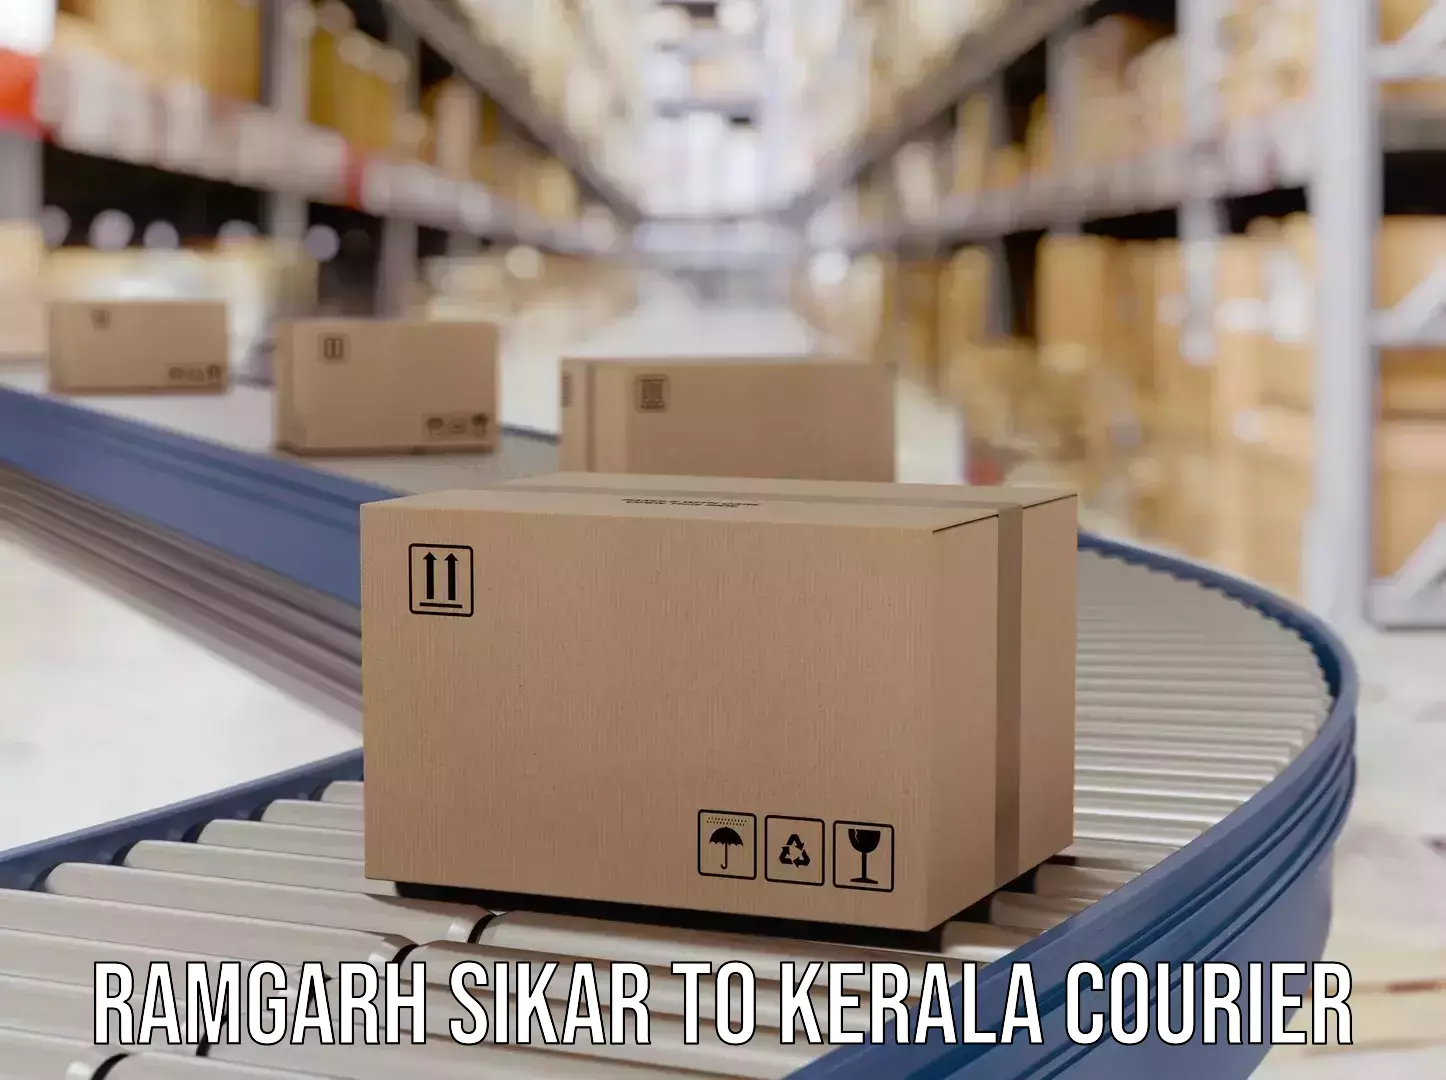 Local courier options Ramgarh Sikar to Kerala